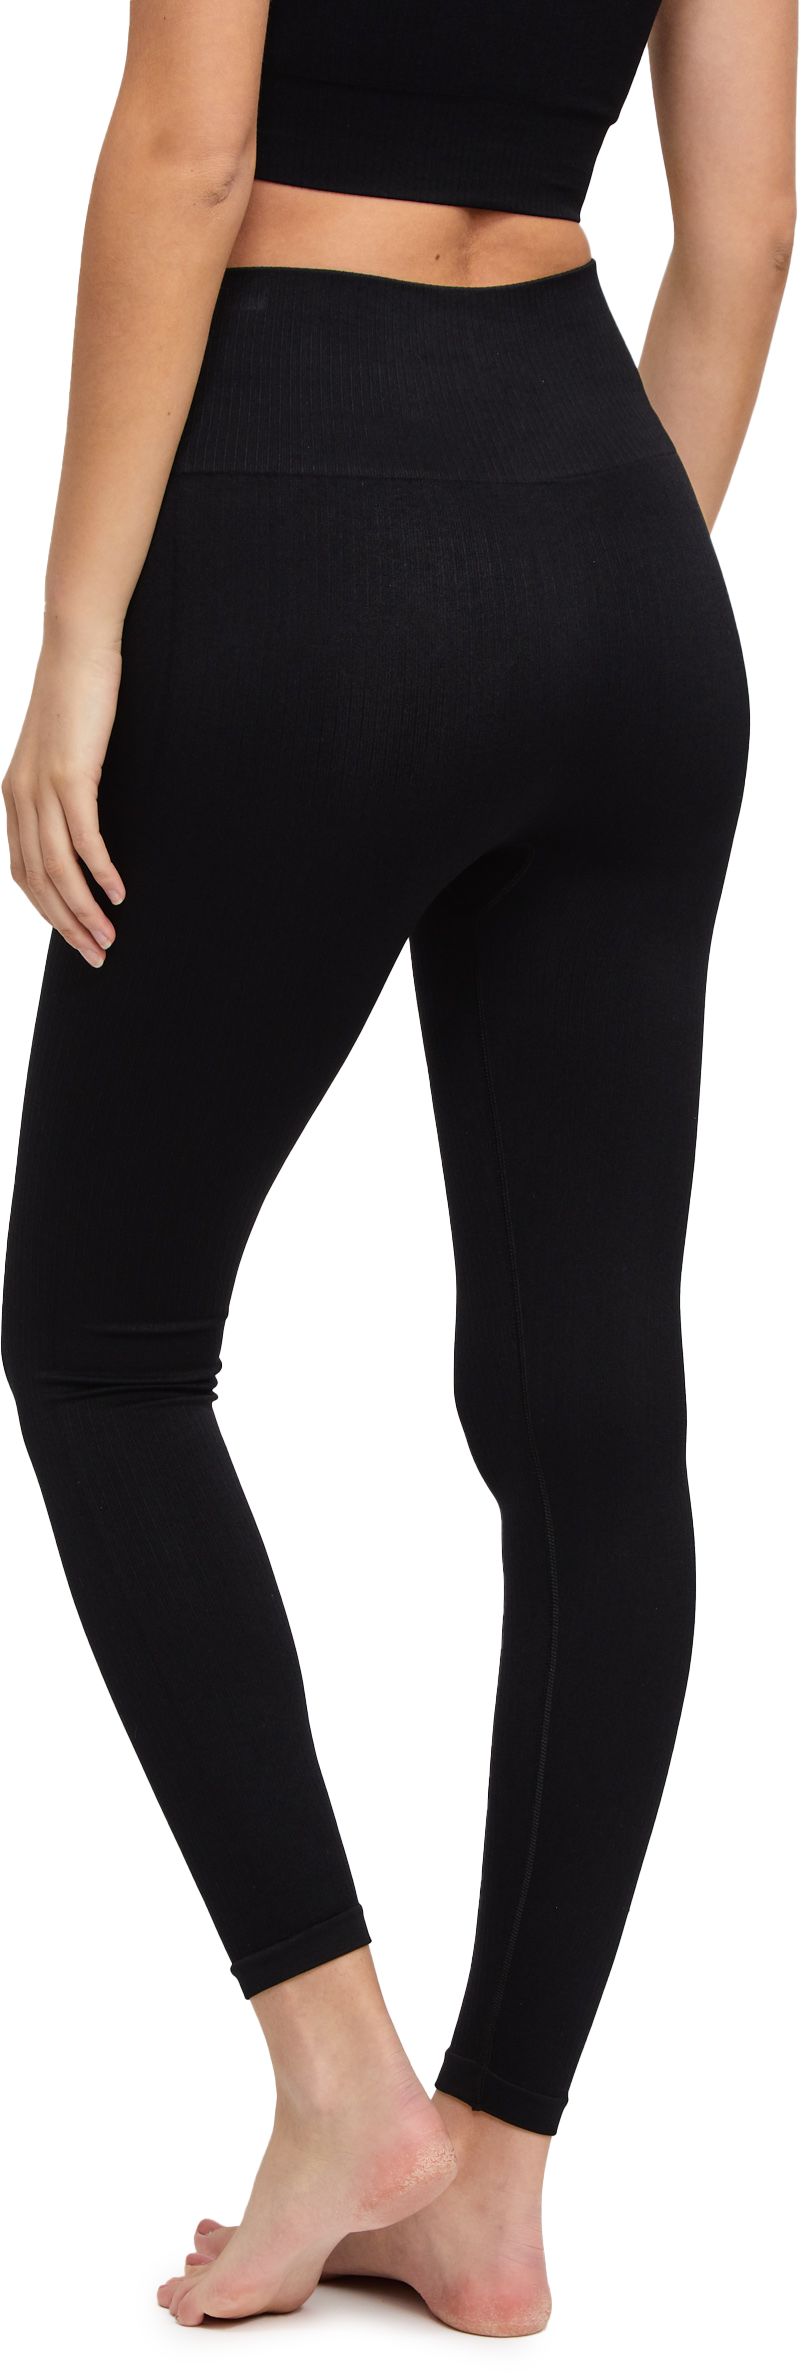 DROP OF MINDFULNESS, W JEANE RIBBED SEAMLESS TIGHTS